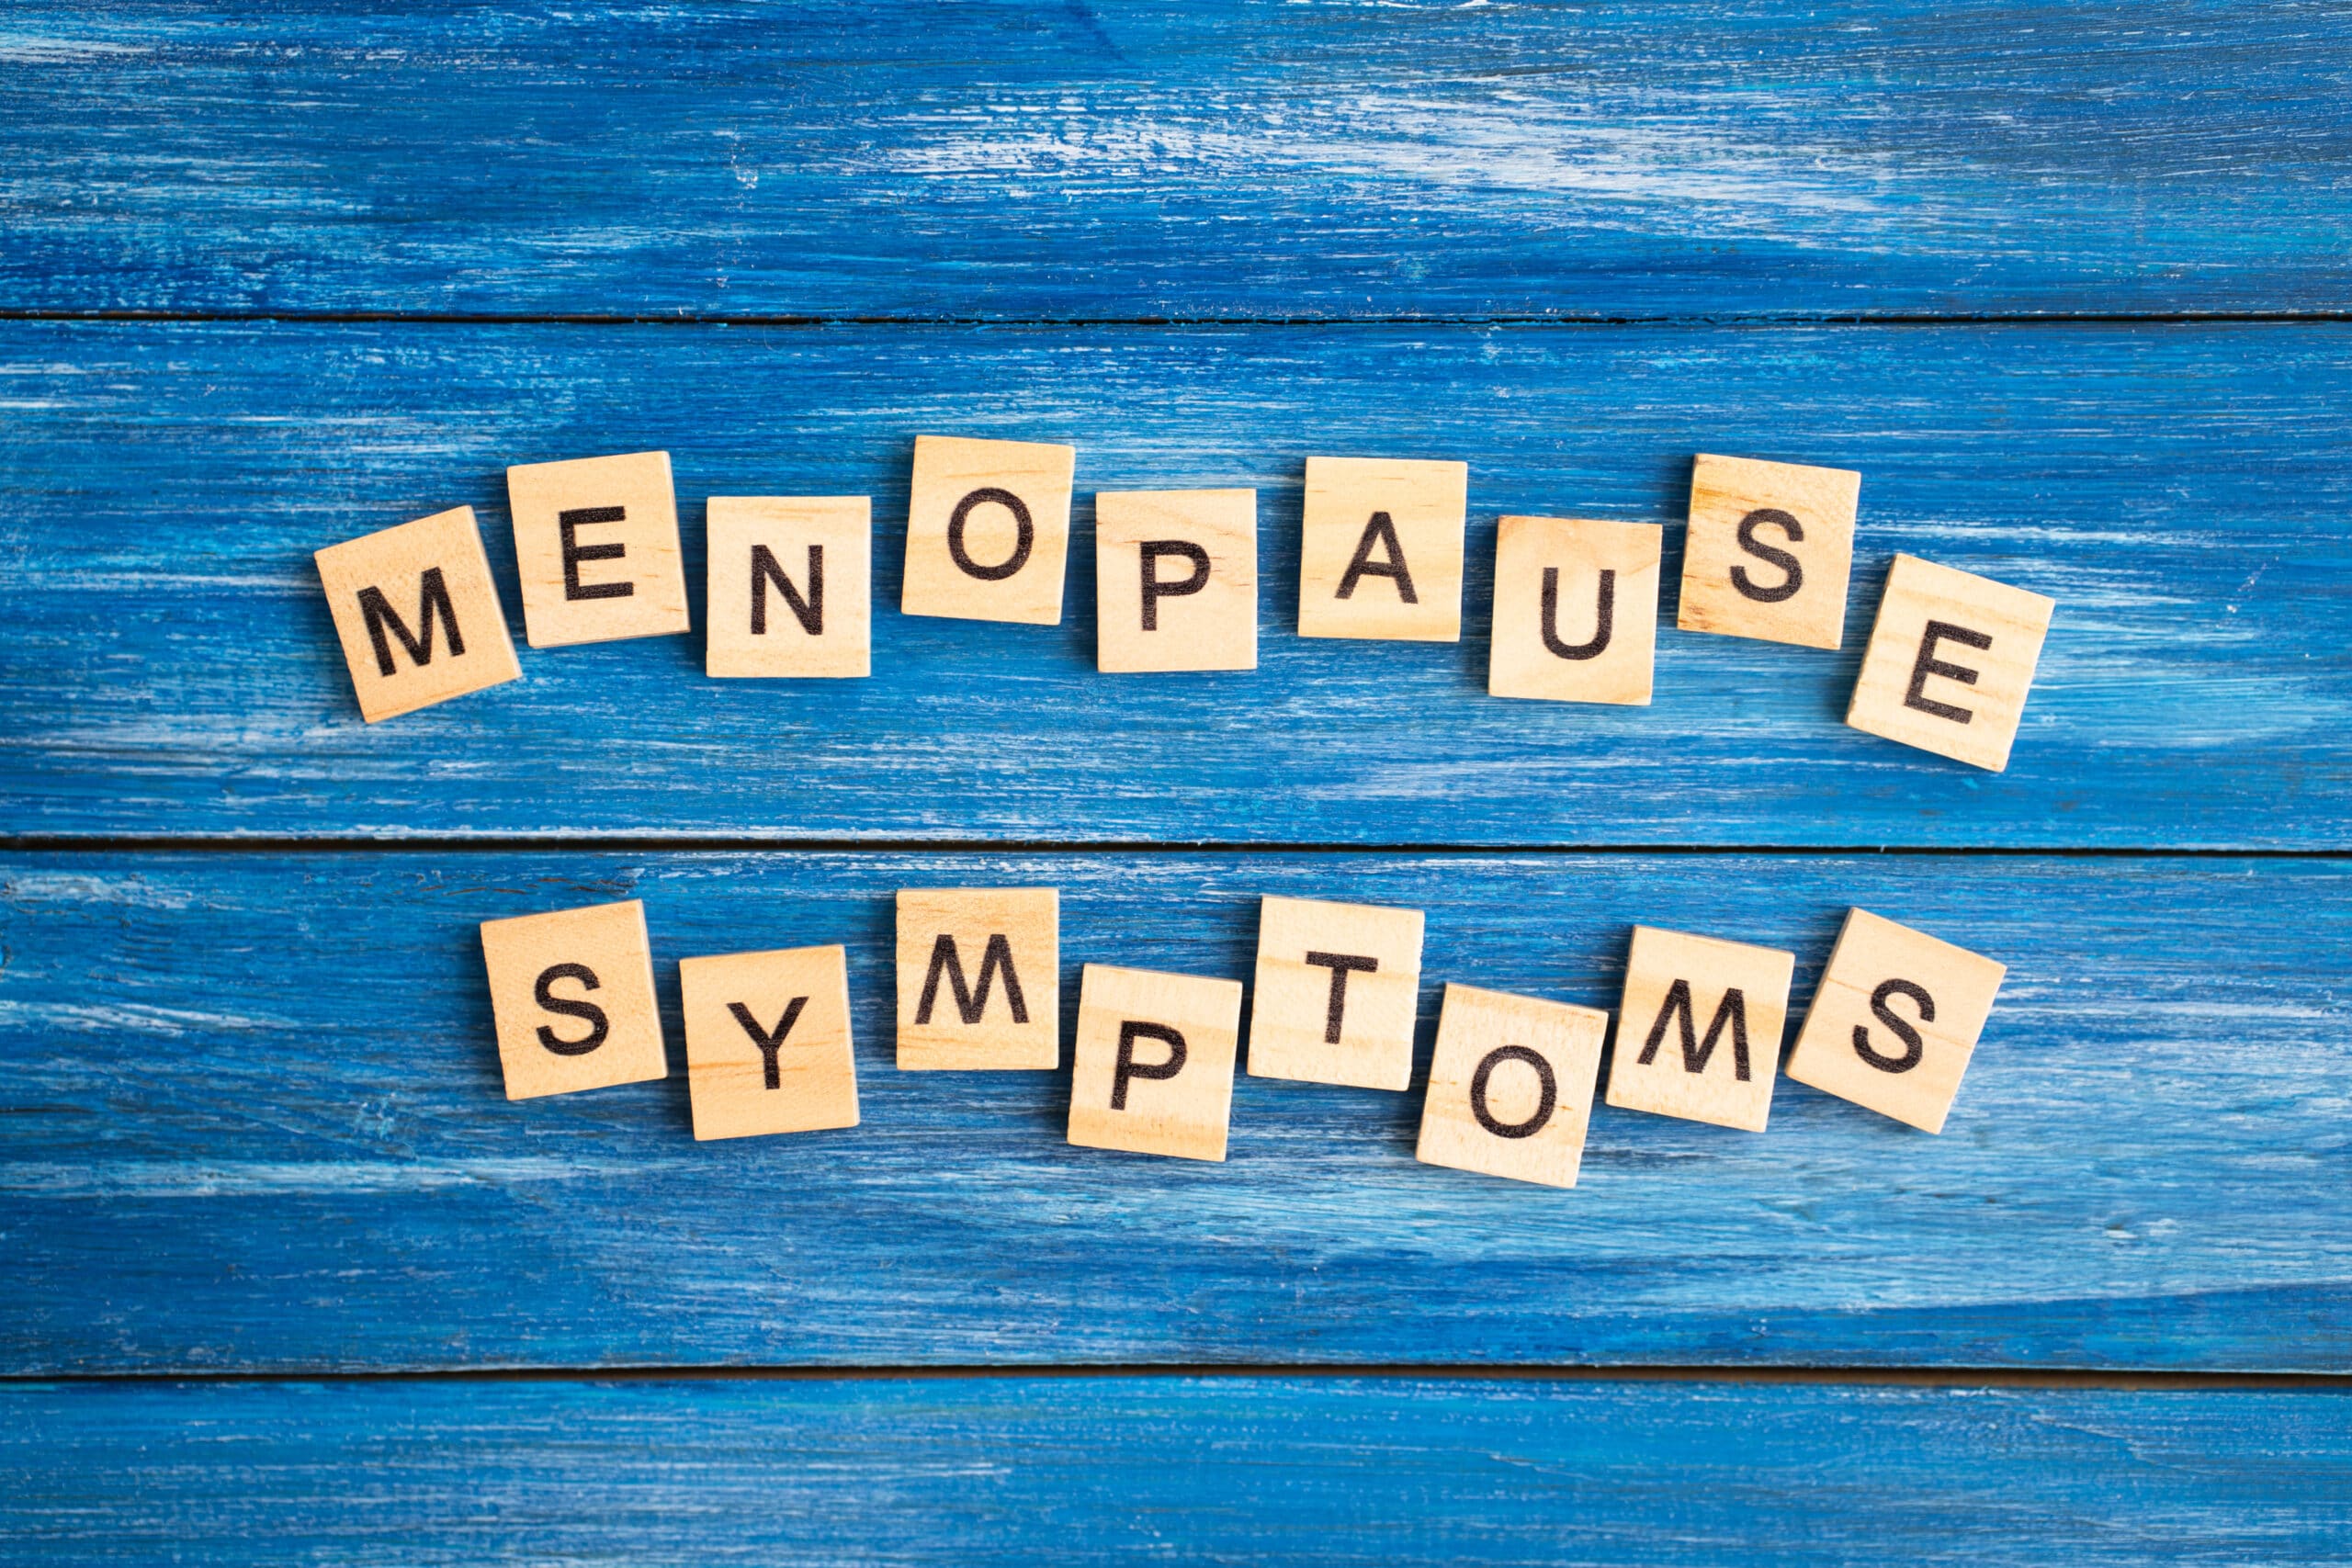 There is ‘no one size fits all’ in menopause